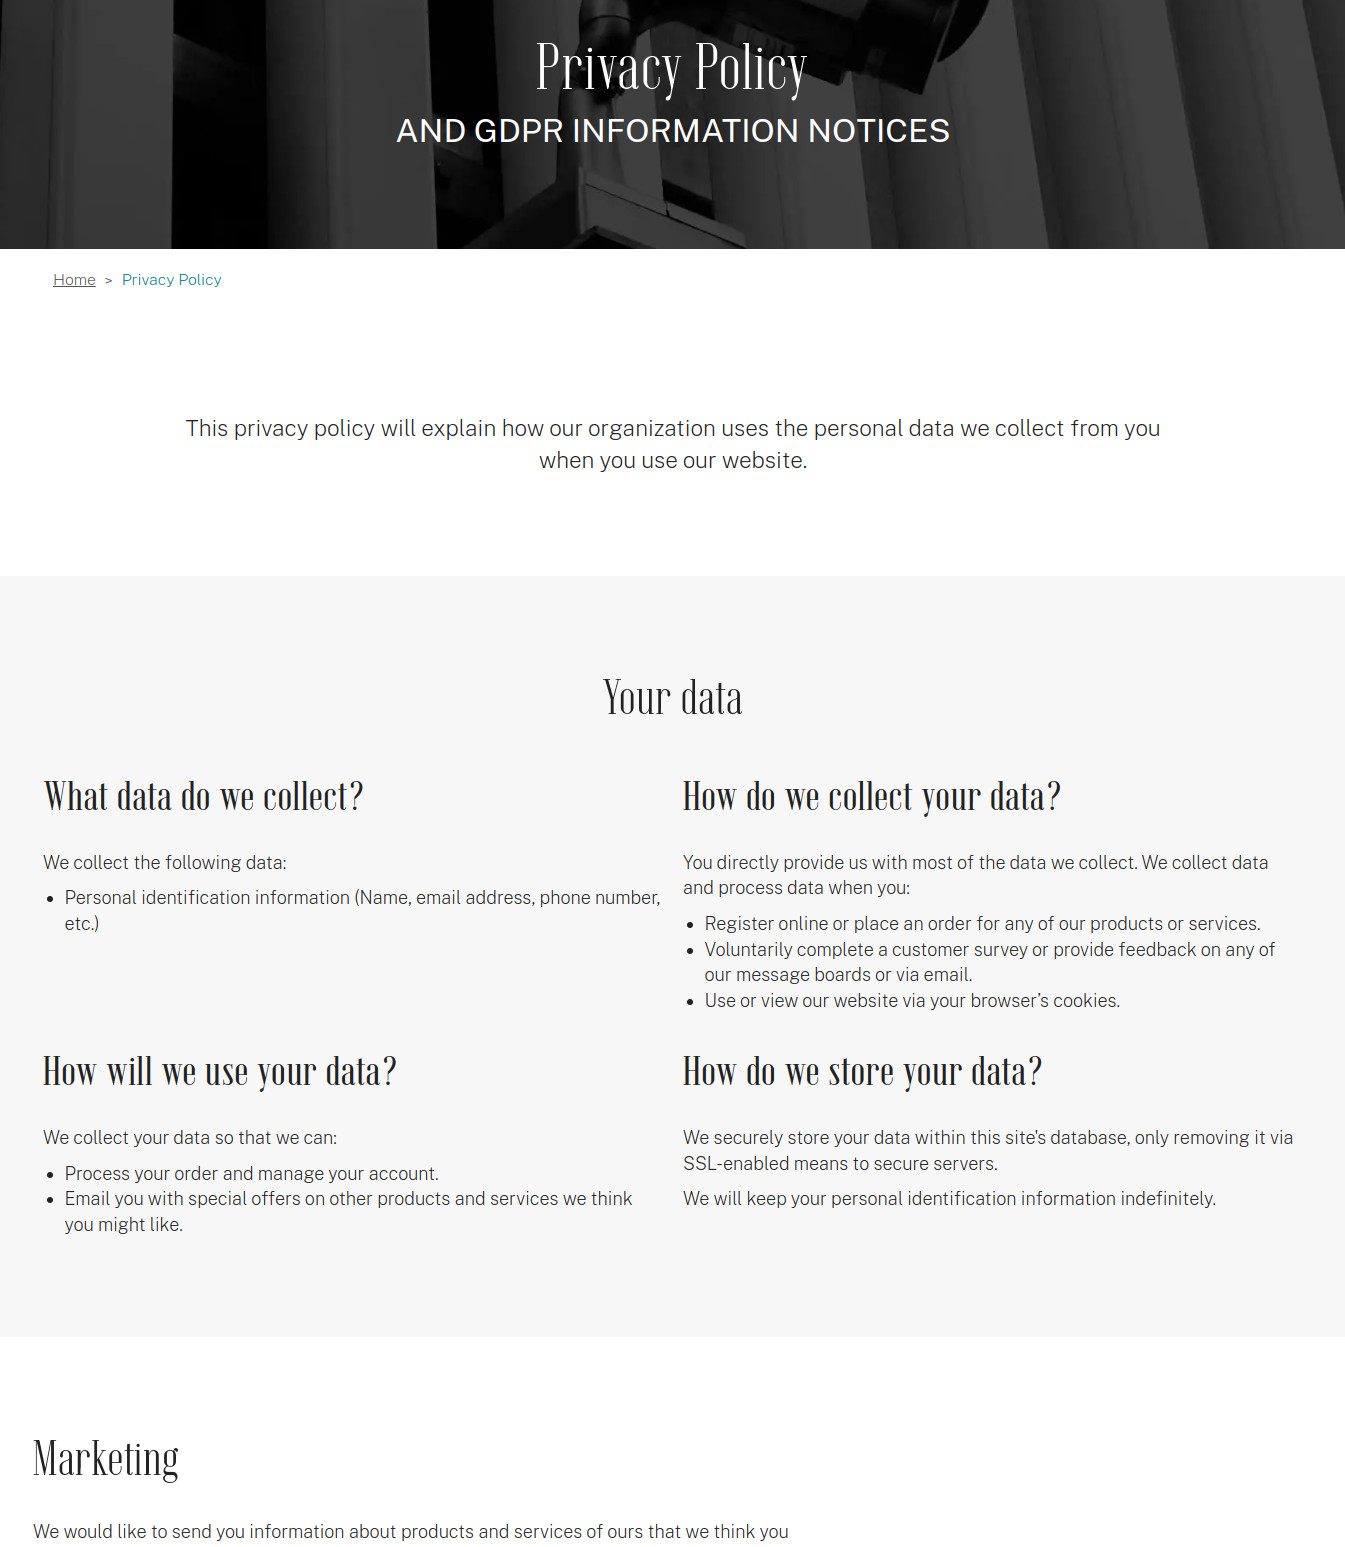 Screenshot of the frost default Privacy Policy, with images and alternating stripes for interest